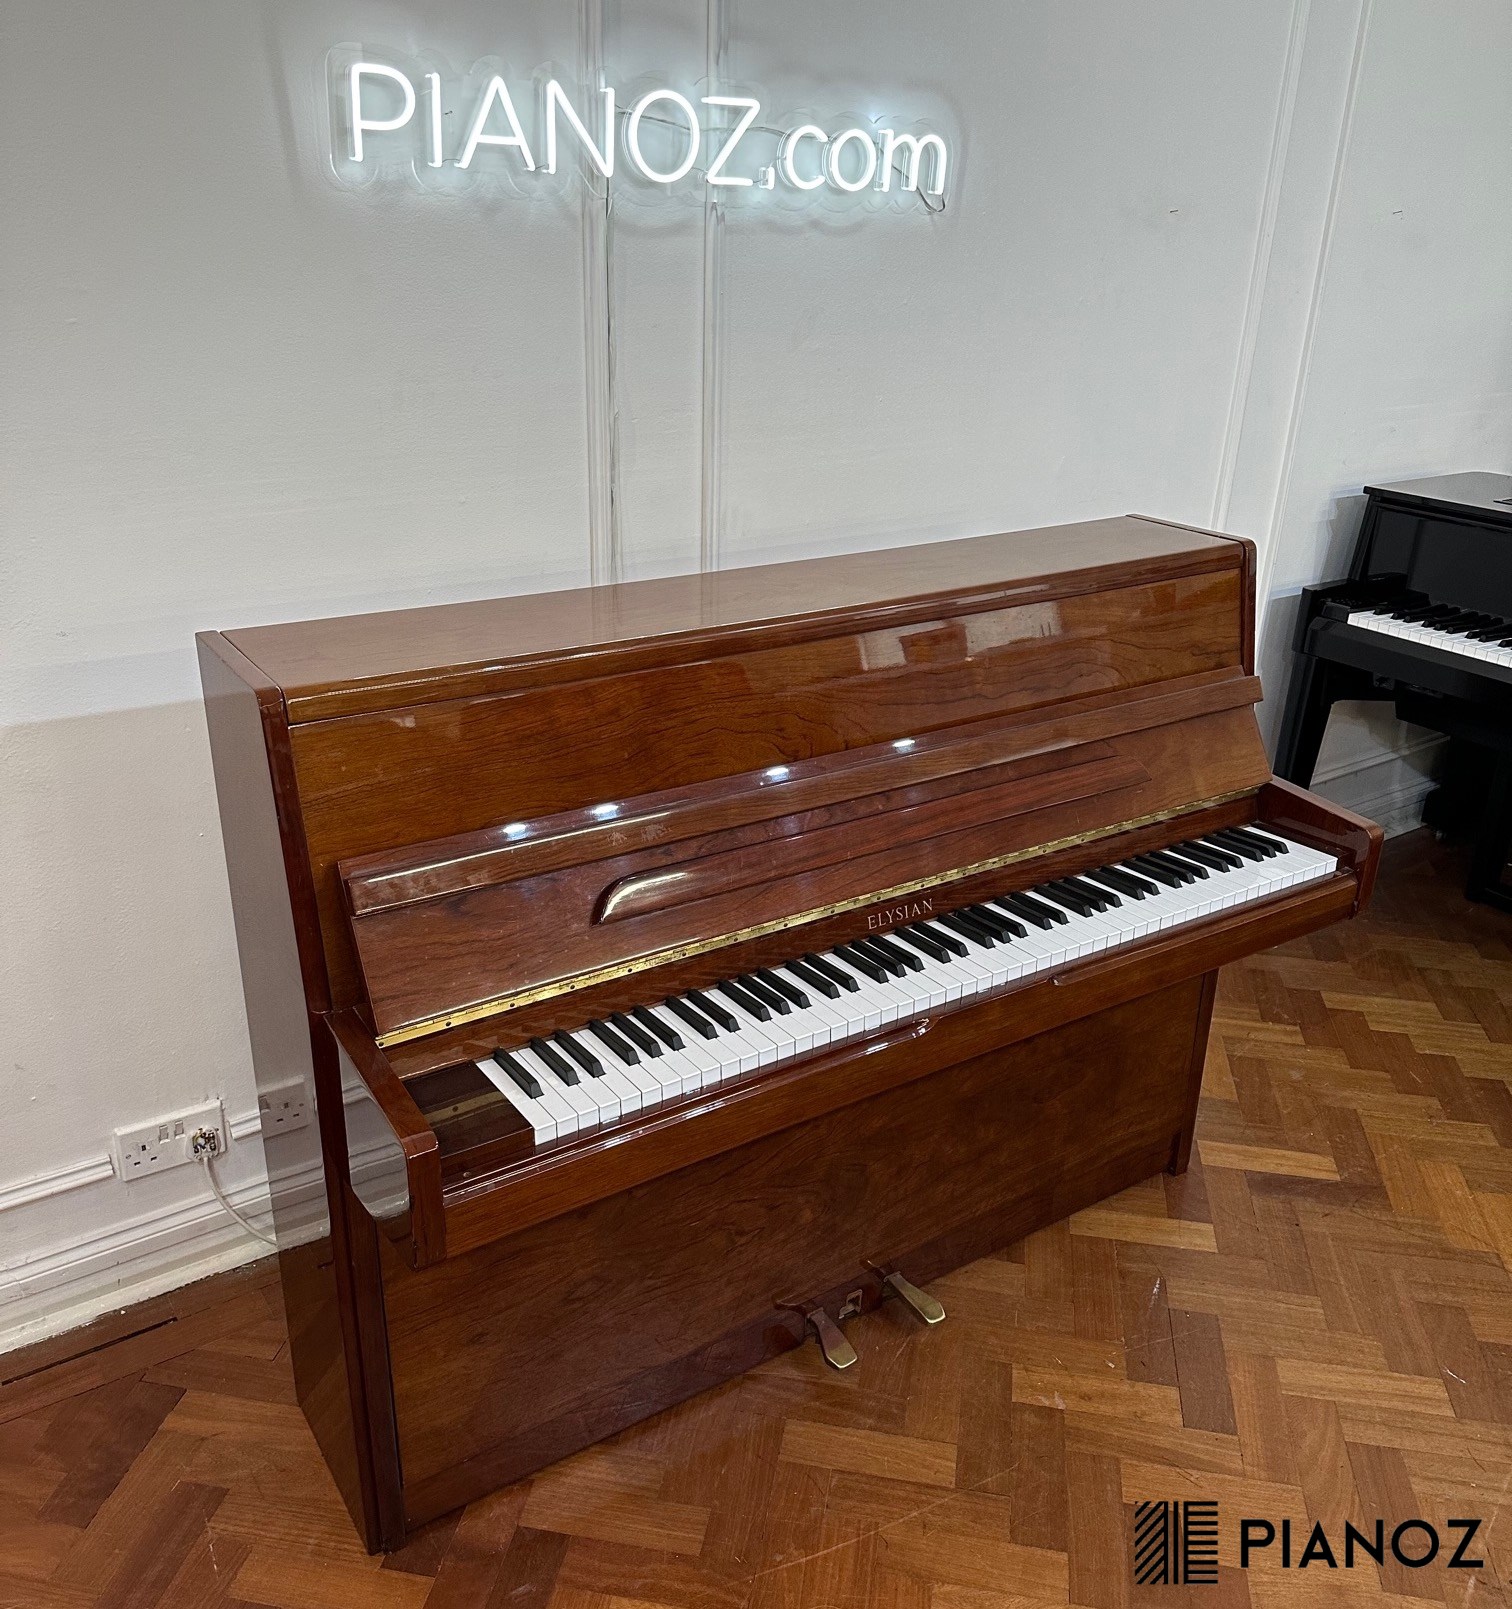 Elysian 108 Upright Piano piano for sale in UK